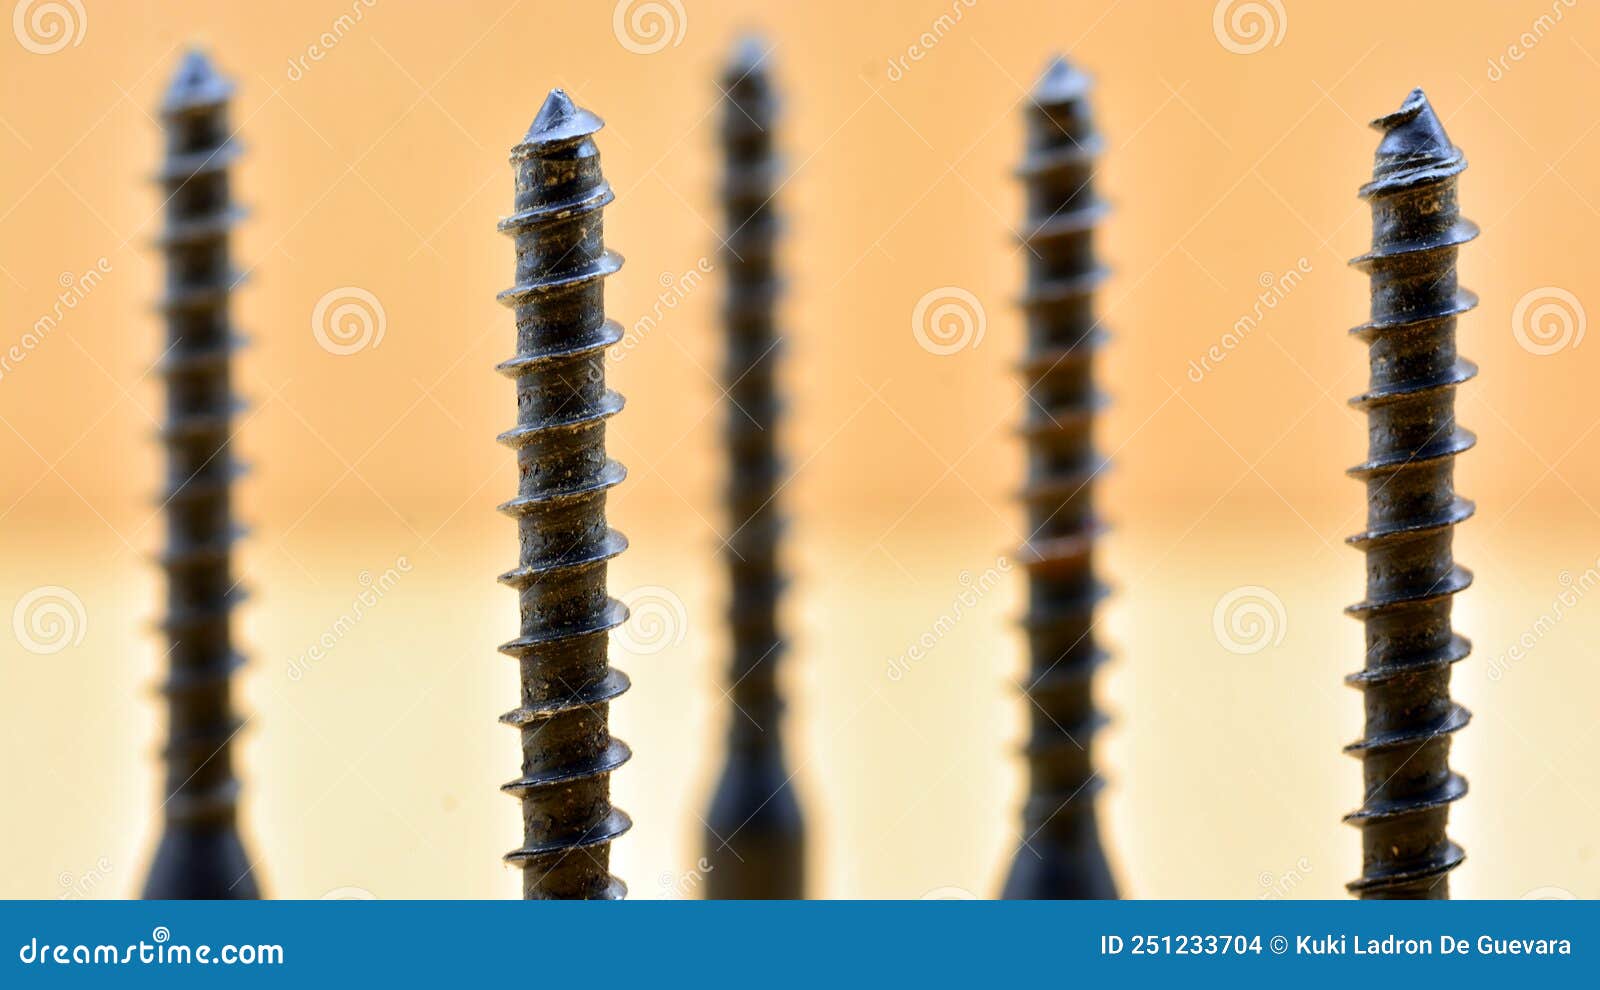 detail of a group of self-tapping screws